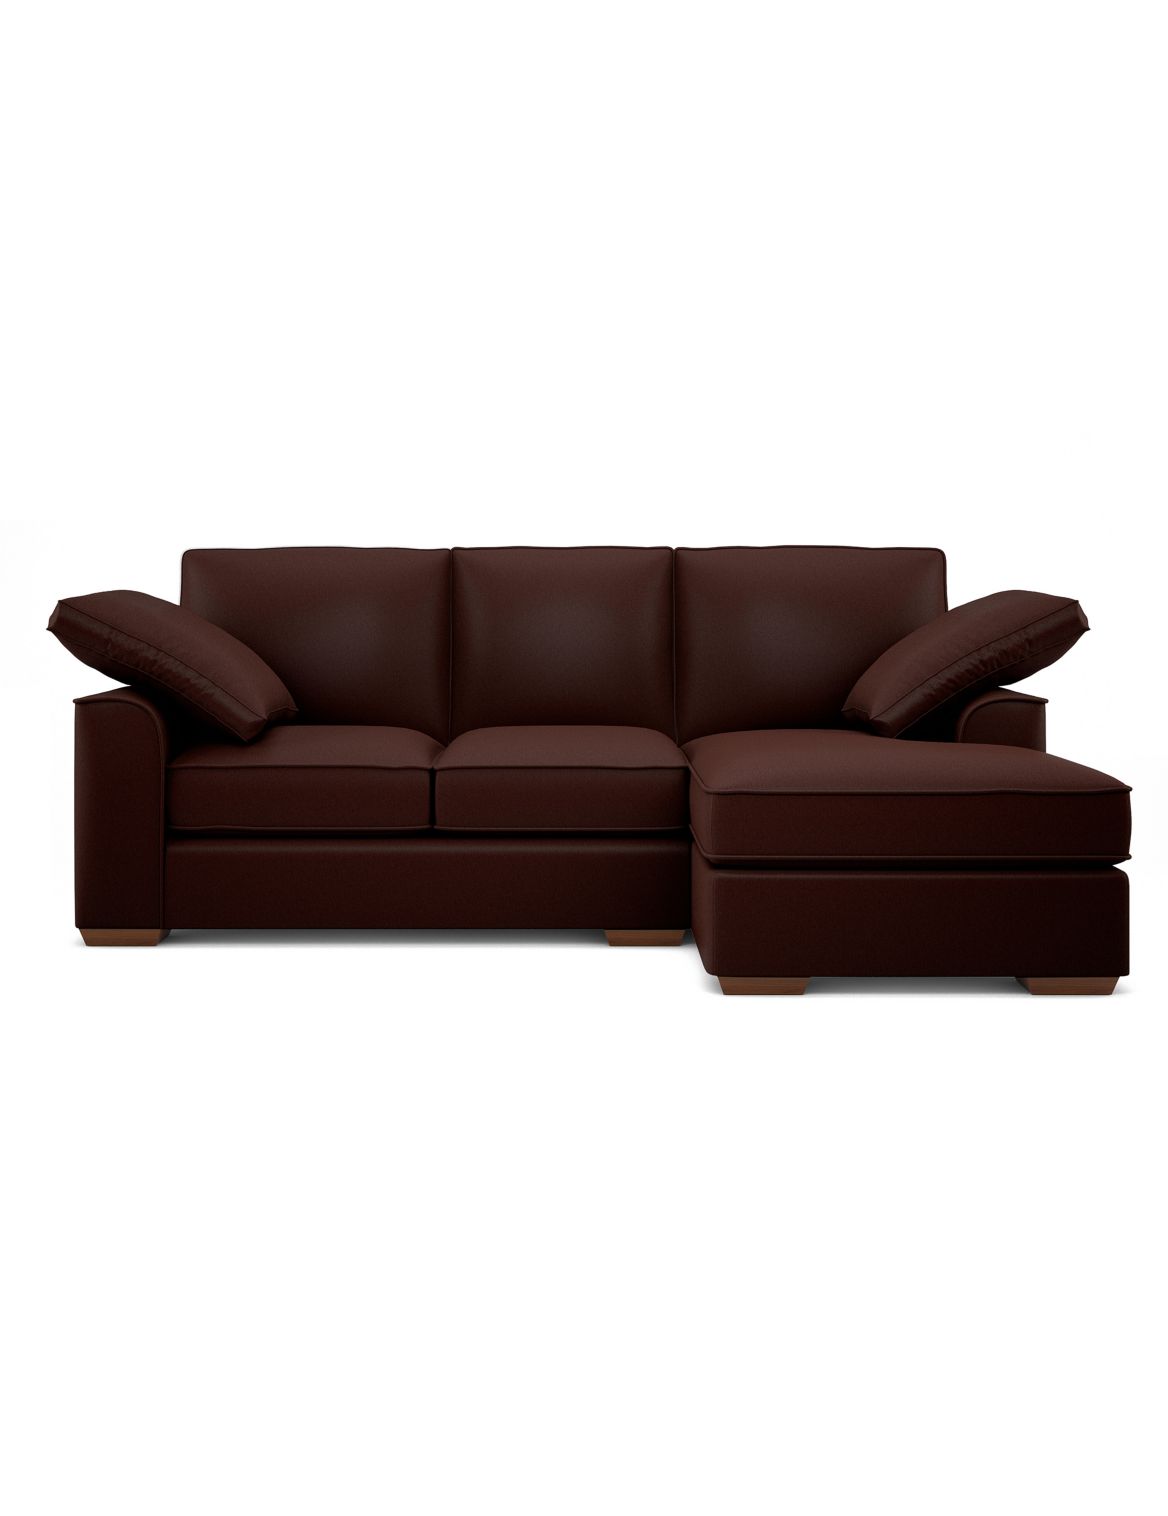 Nantucket 3 Seater Chaise (Right-Hand) brown